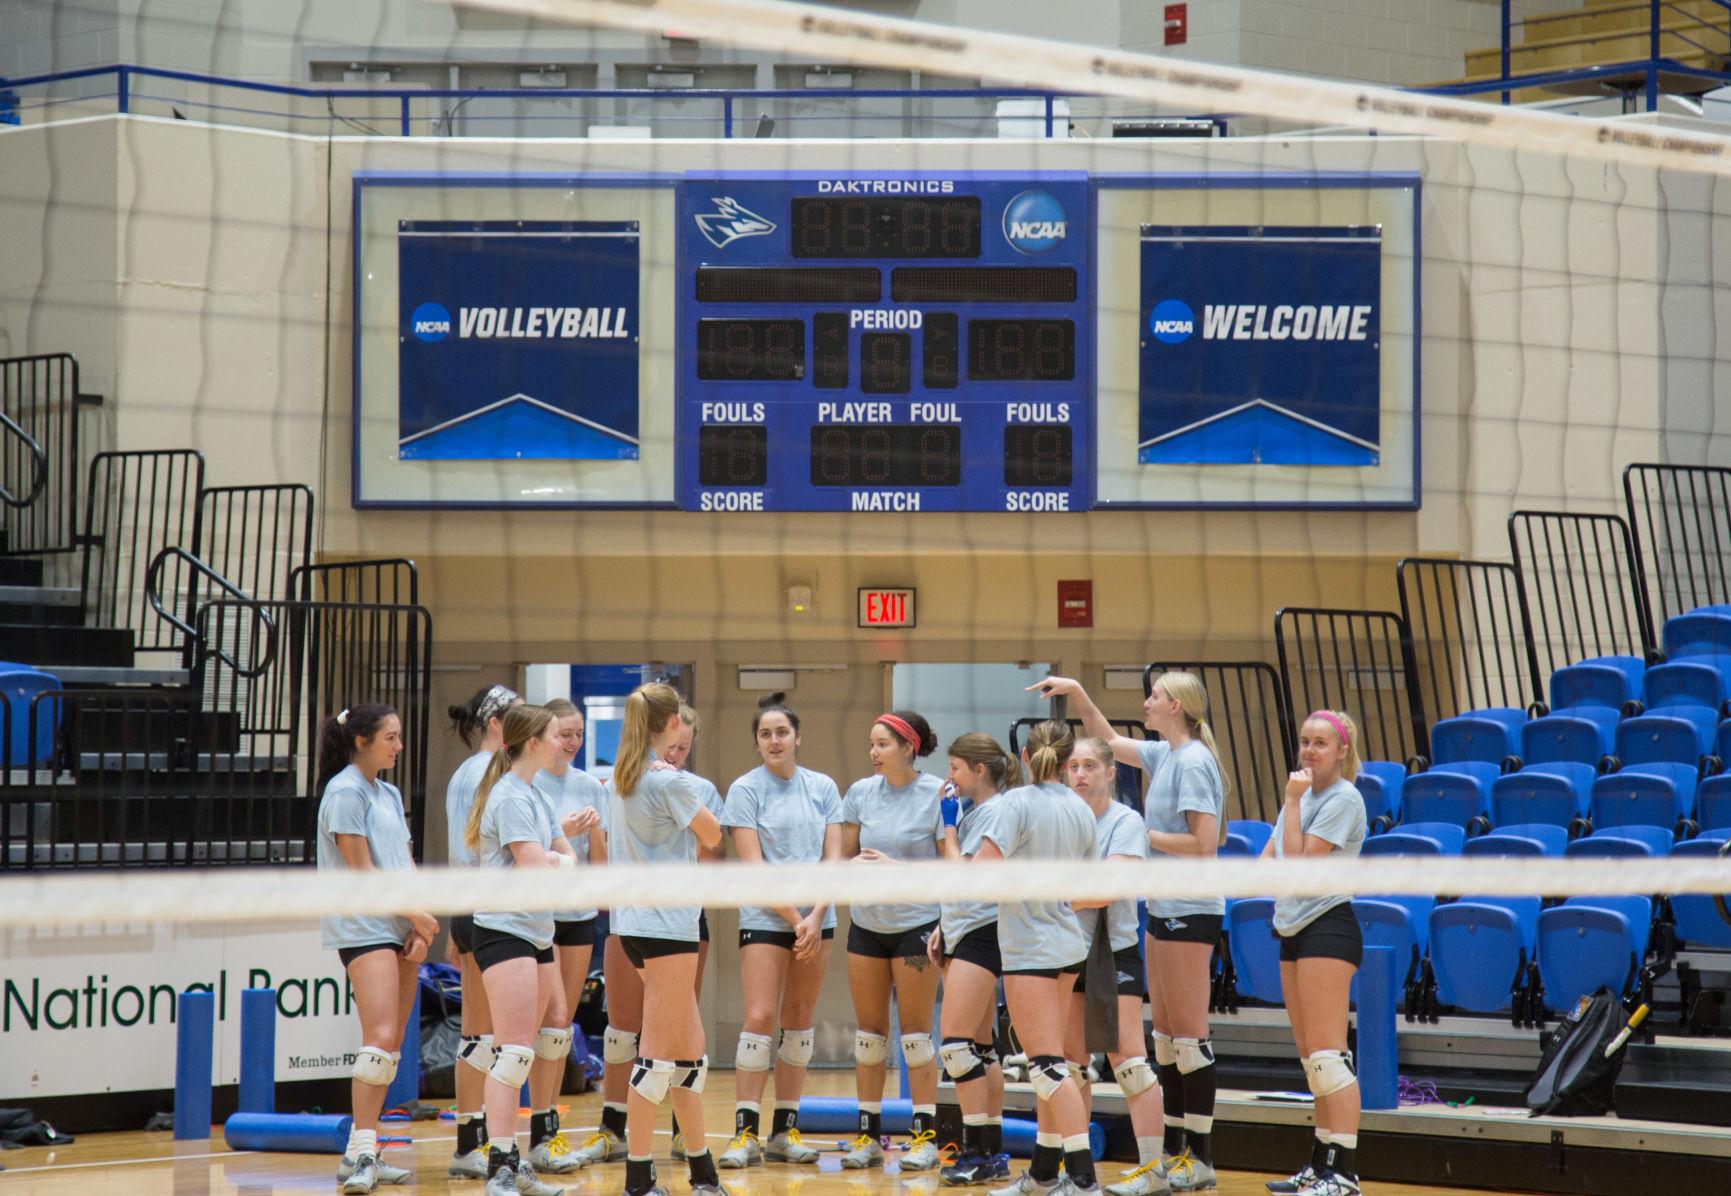 UNK arena transforms into neutral site for NCAA volleyball tournament